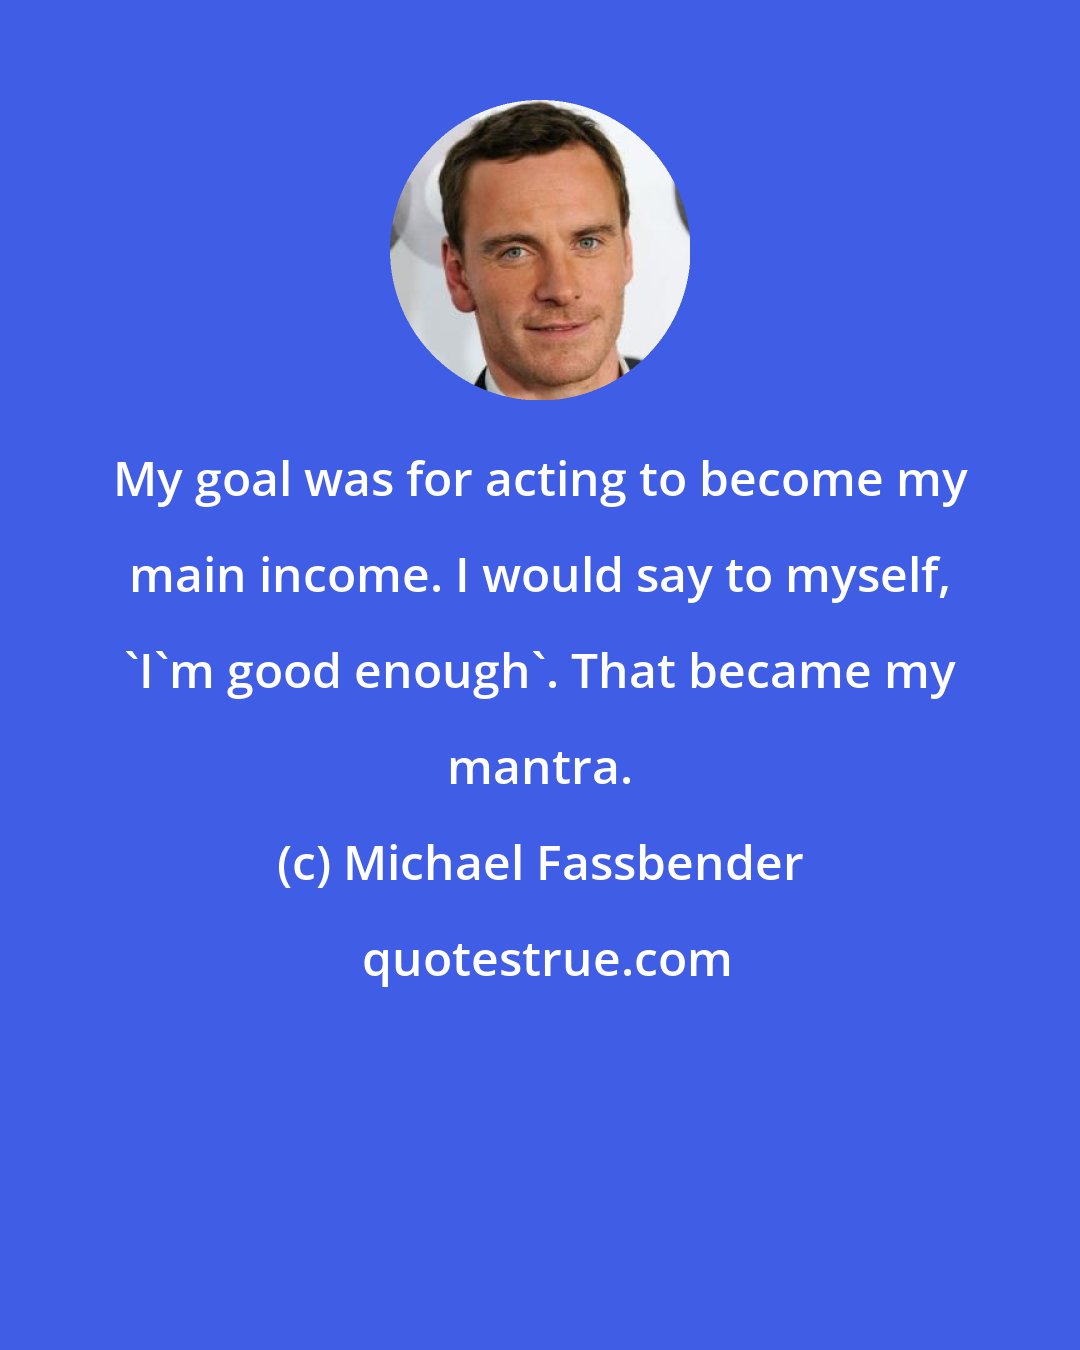 Michael Fassbender: My goal was for acting to become my main income. I would say to myself, 'I'm good enough'. That became my mantra.